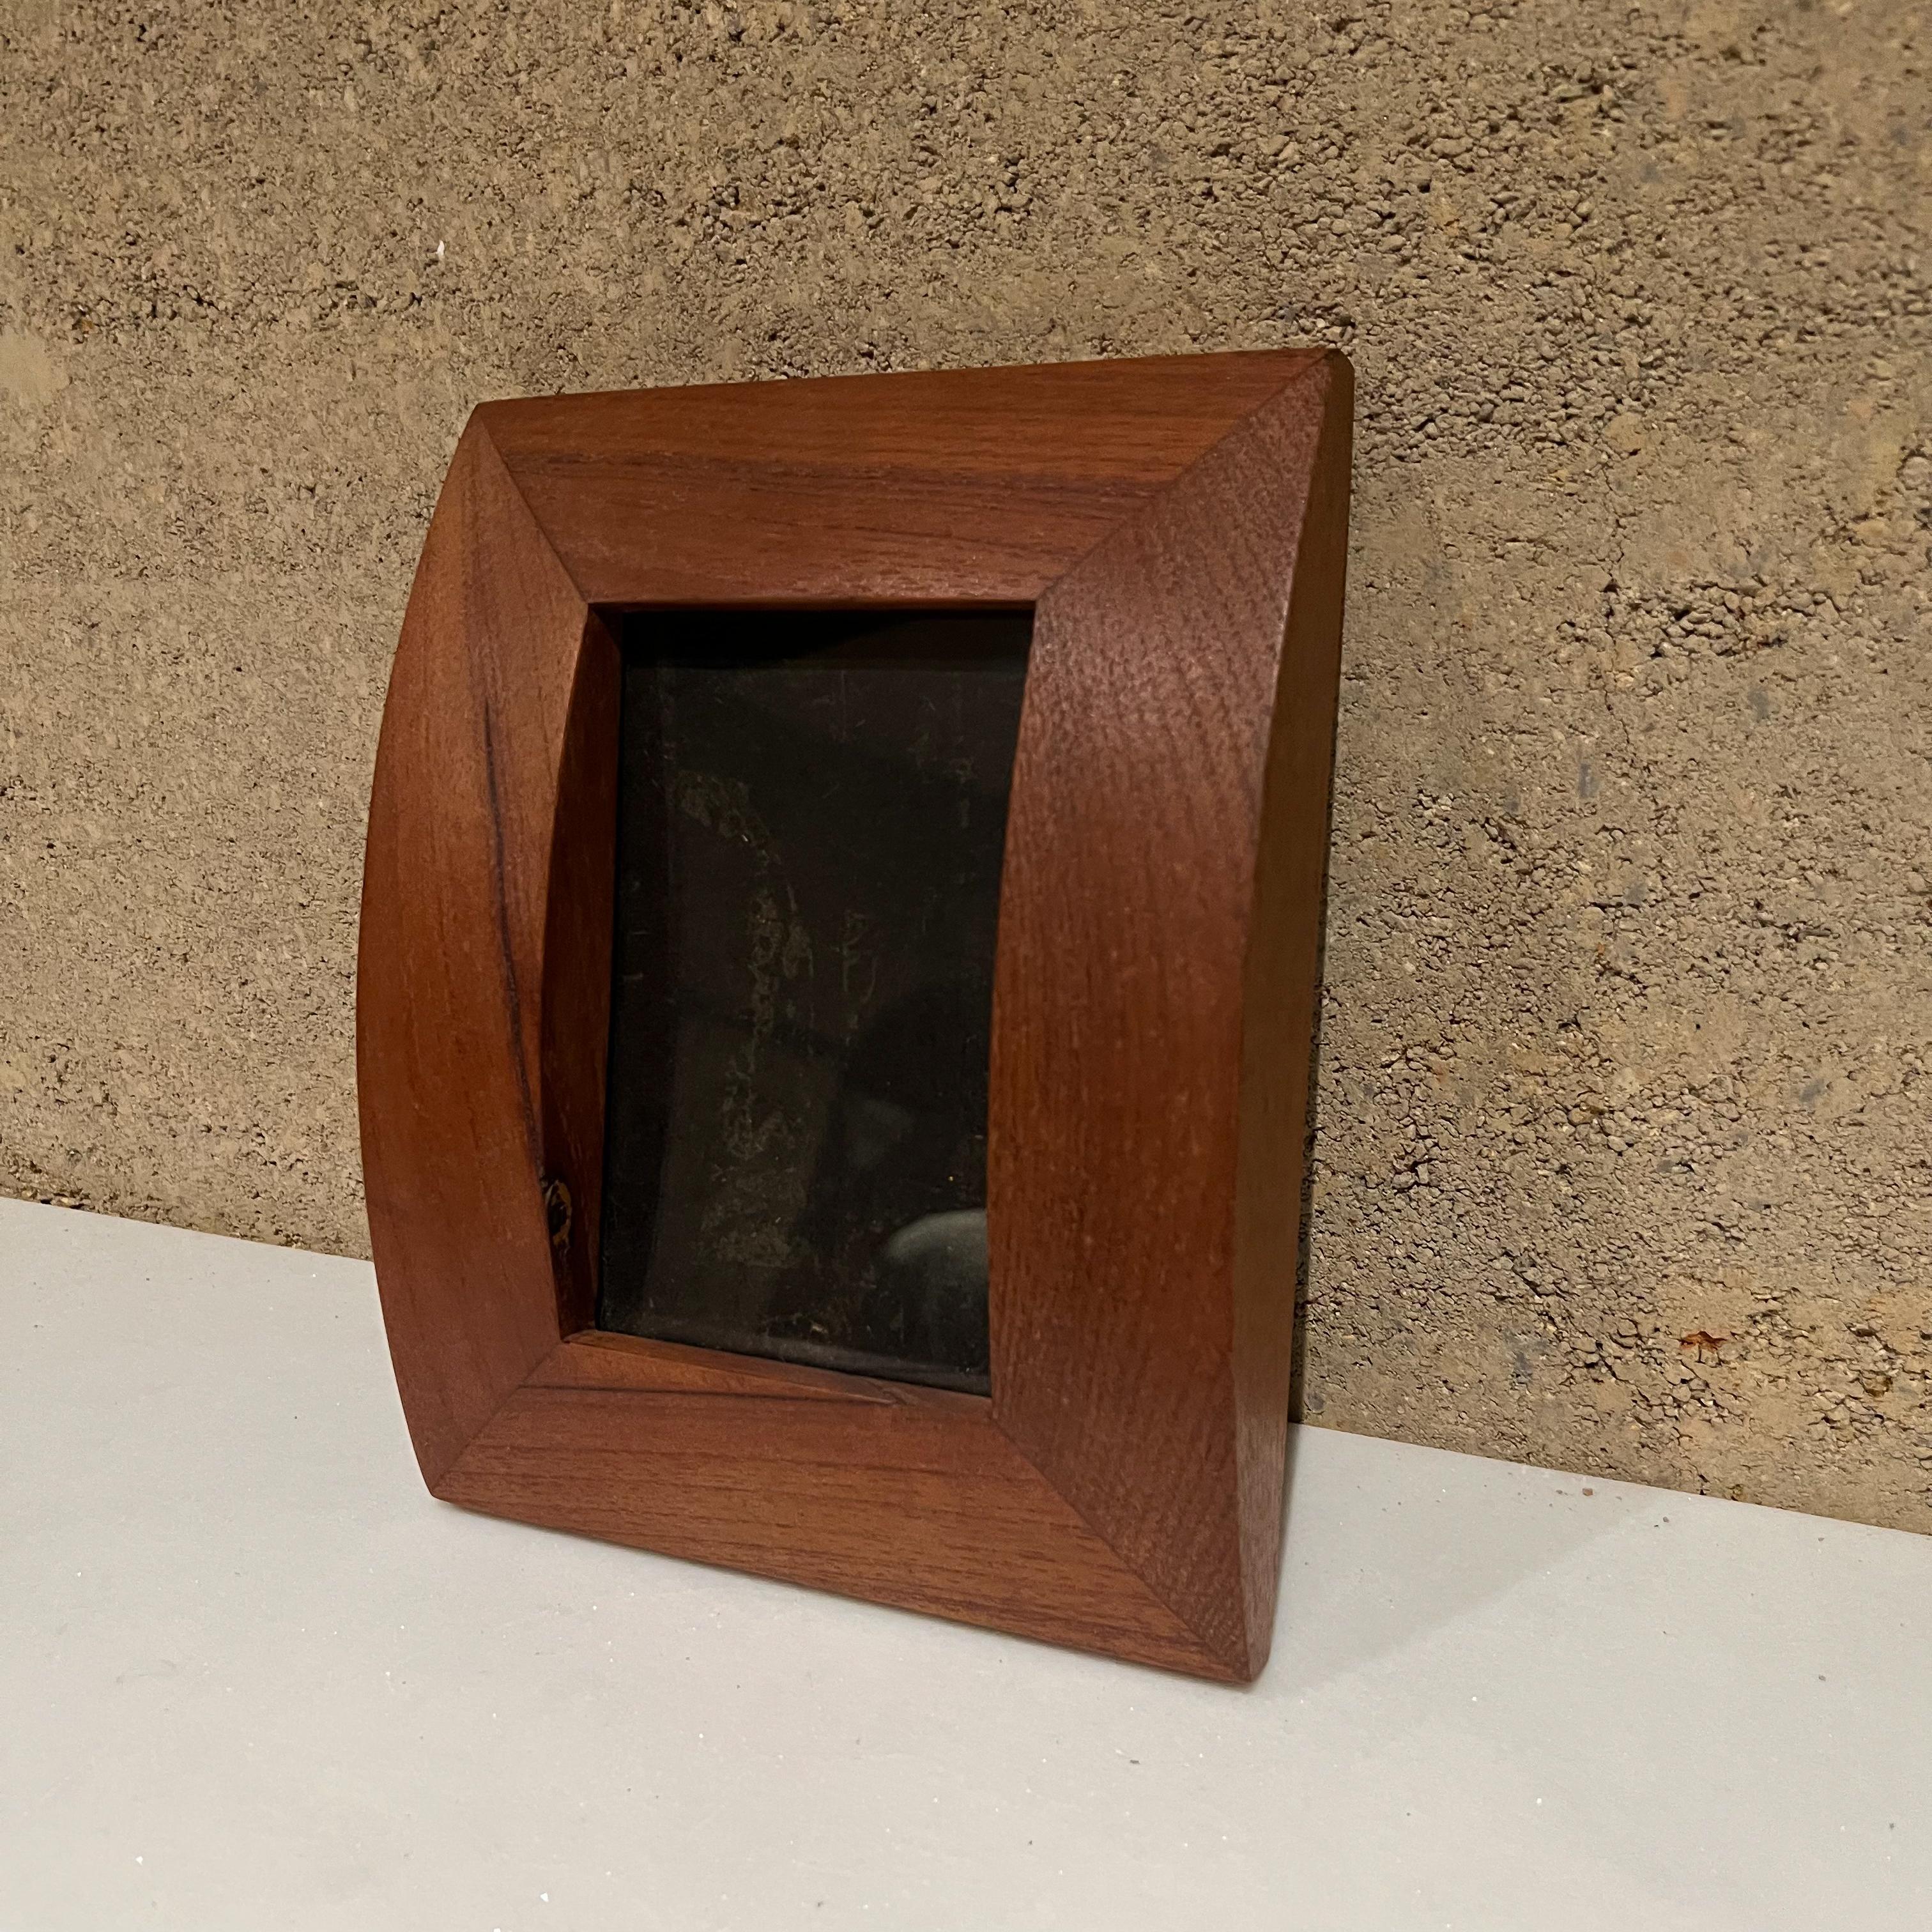 Late 20th Century Mexican Modernism Curved Mahogany Tabletop Picture Frame 1970s Mexico